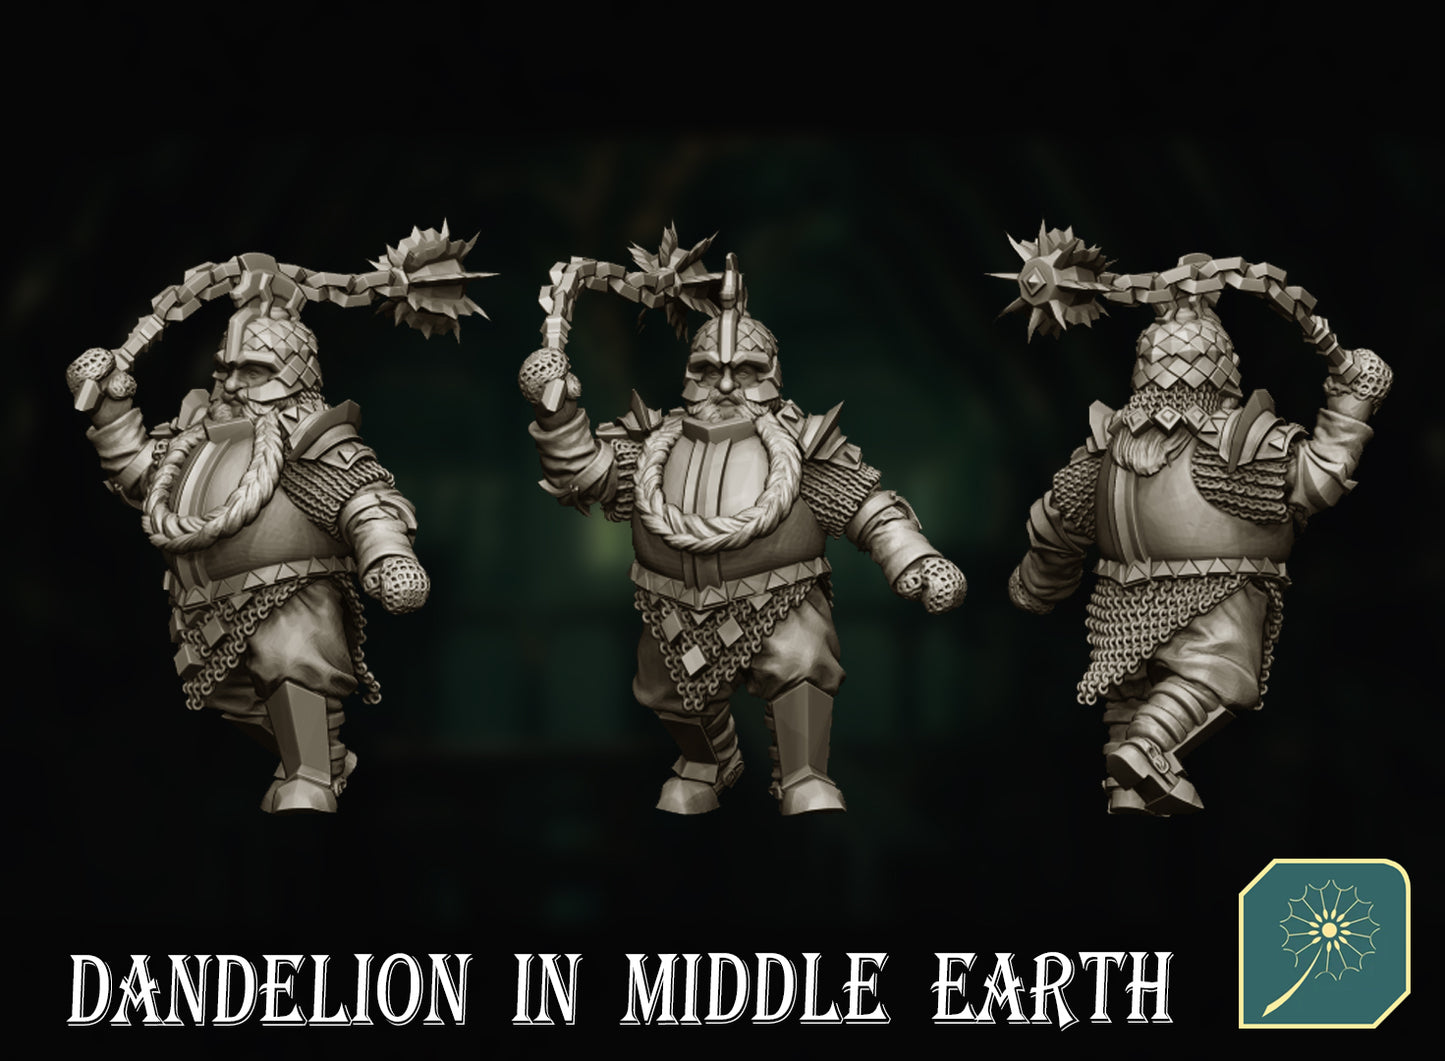 Master Dwarf Grombur (flail, warhorn or armored with flail) from Dandelion in Middle Earth